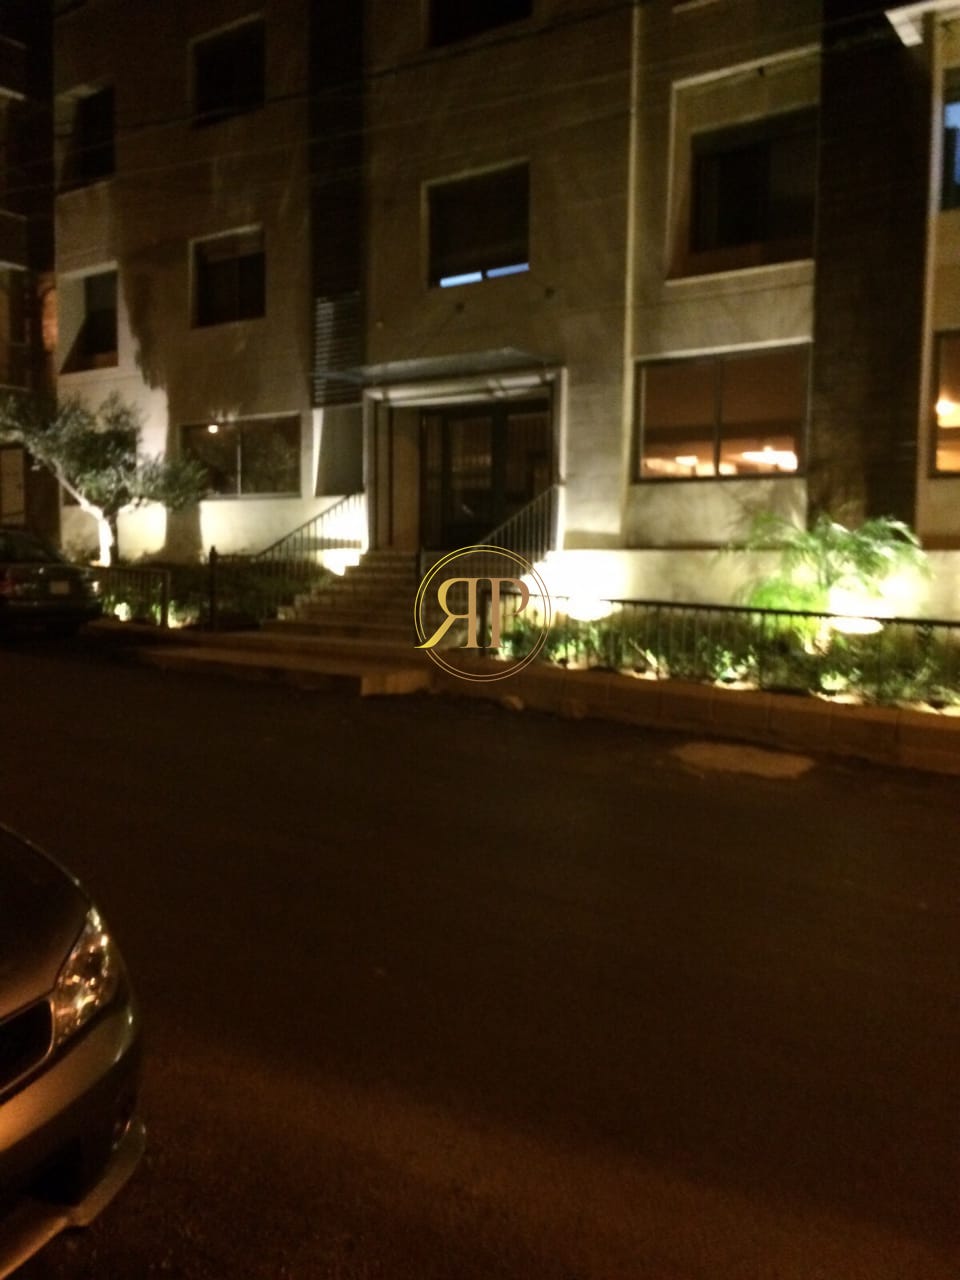 SEA VIEW BEAUTIFUL FURNISHED APARTMENT FOR RENT IN THE BAABDA